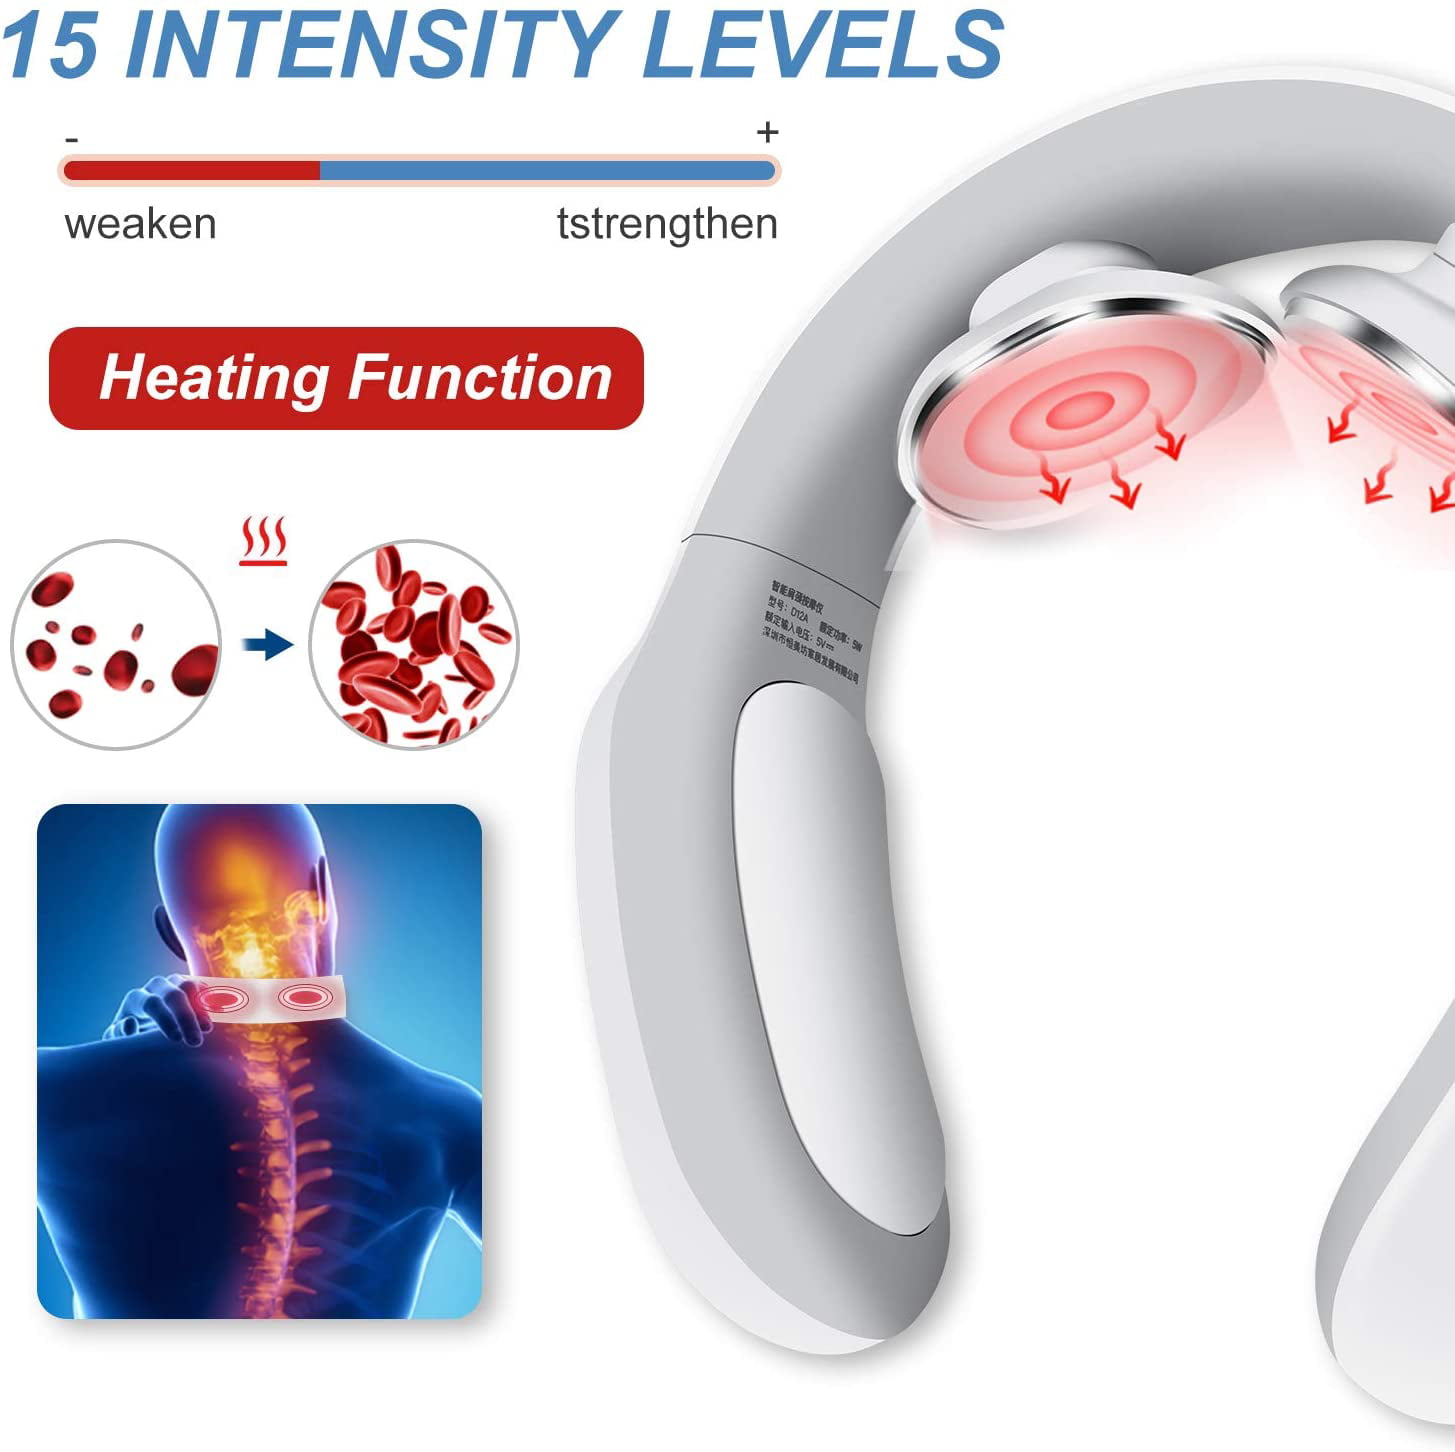 Smart Neck Massager with Heat - Cordless Rechargeable Trigger Point Deep  Tissue Portable Neck Massag…See more Smart Neck Massager with Heat -  Cordless